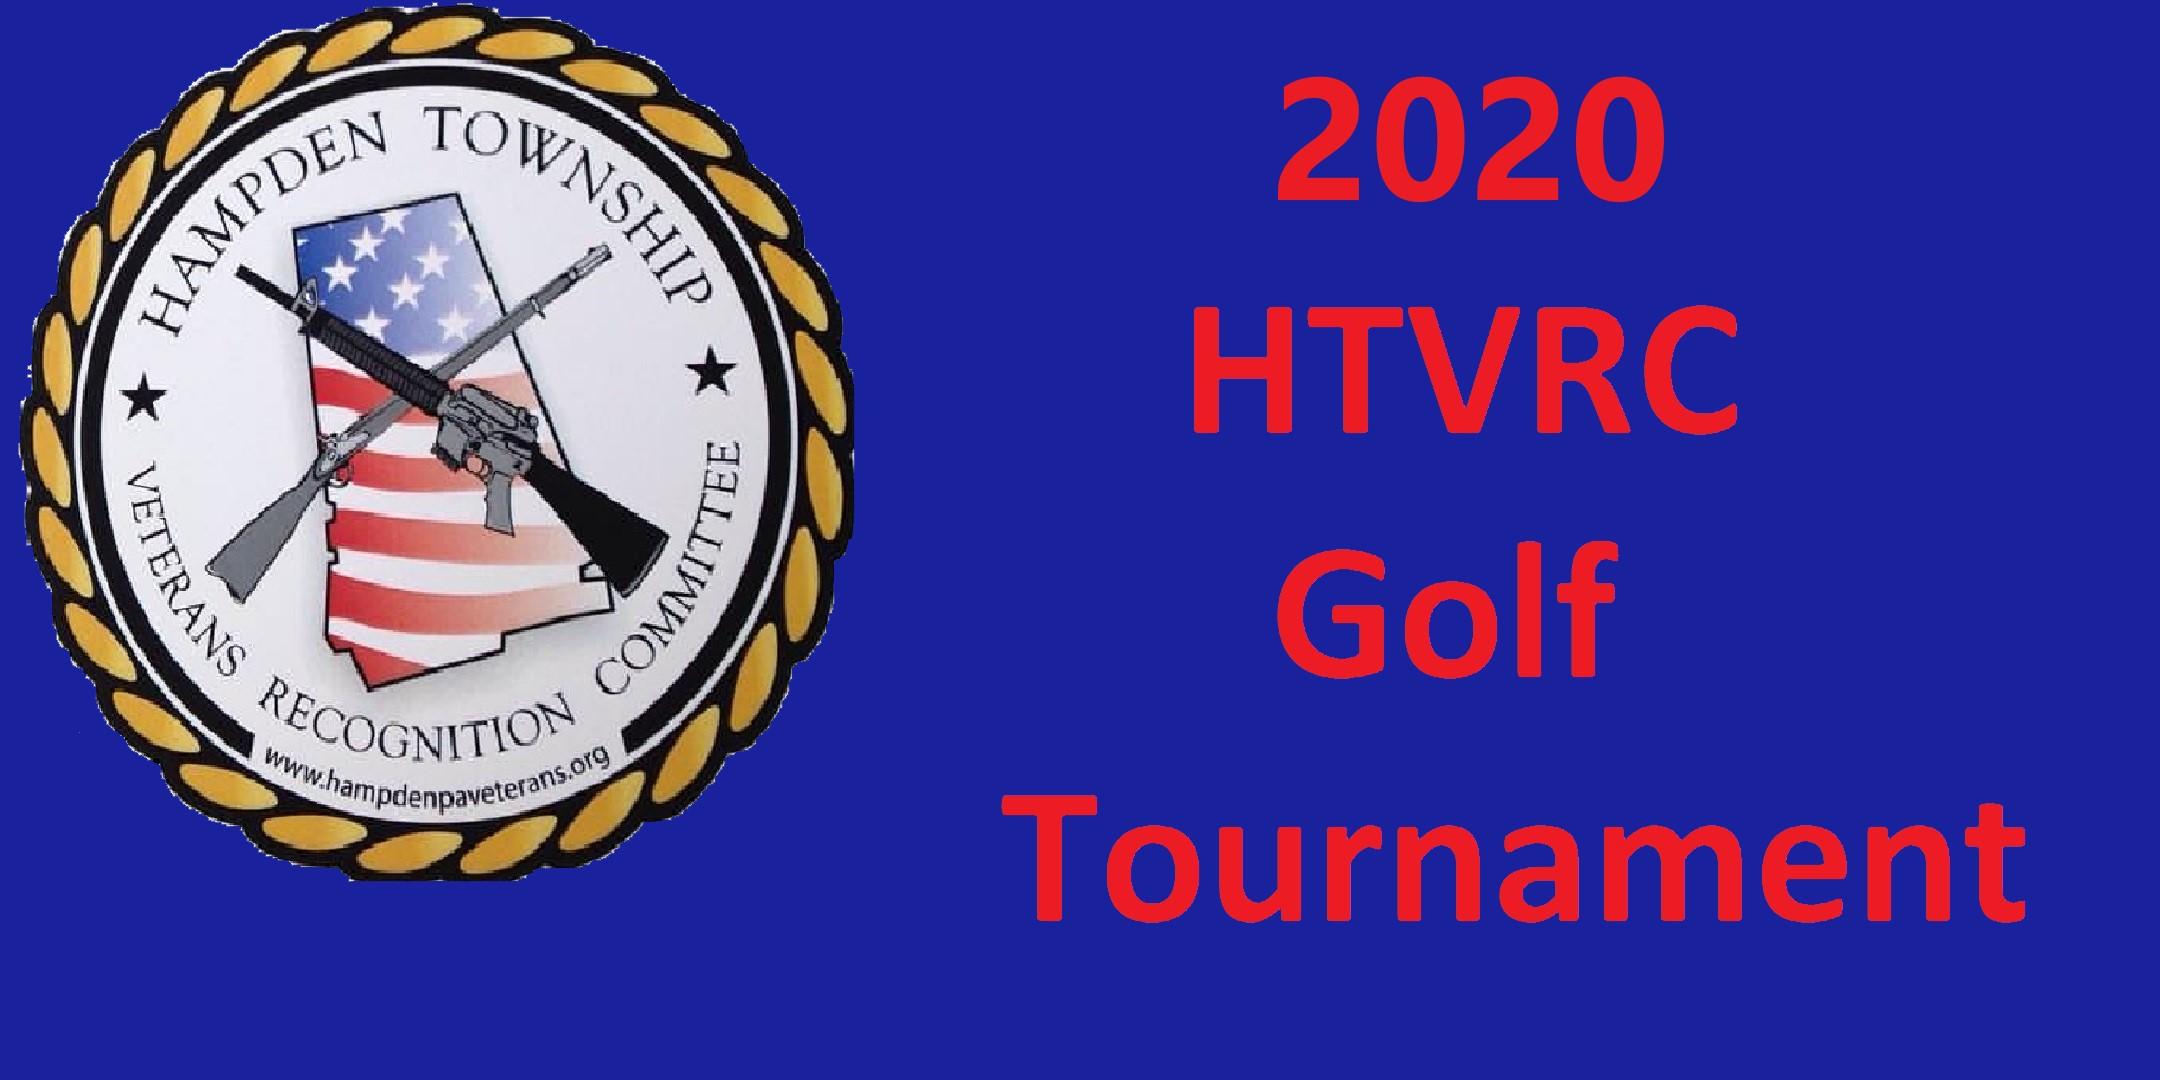 HTVRC Annual Golf Outing